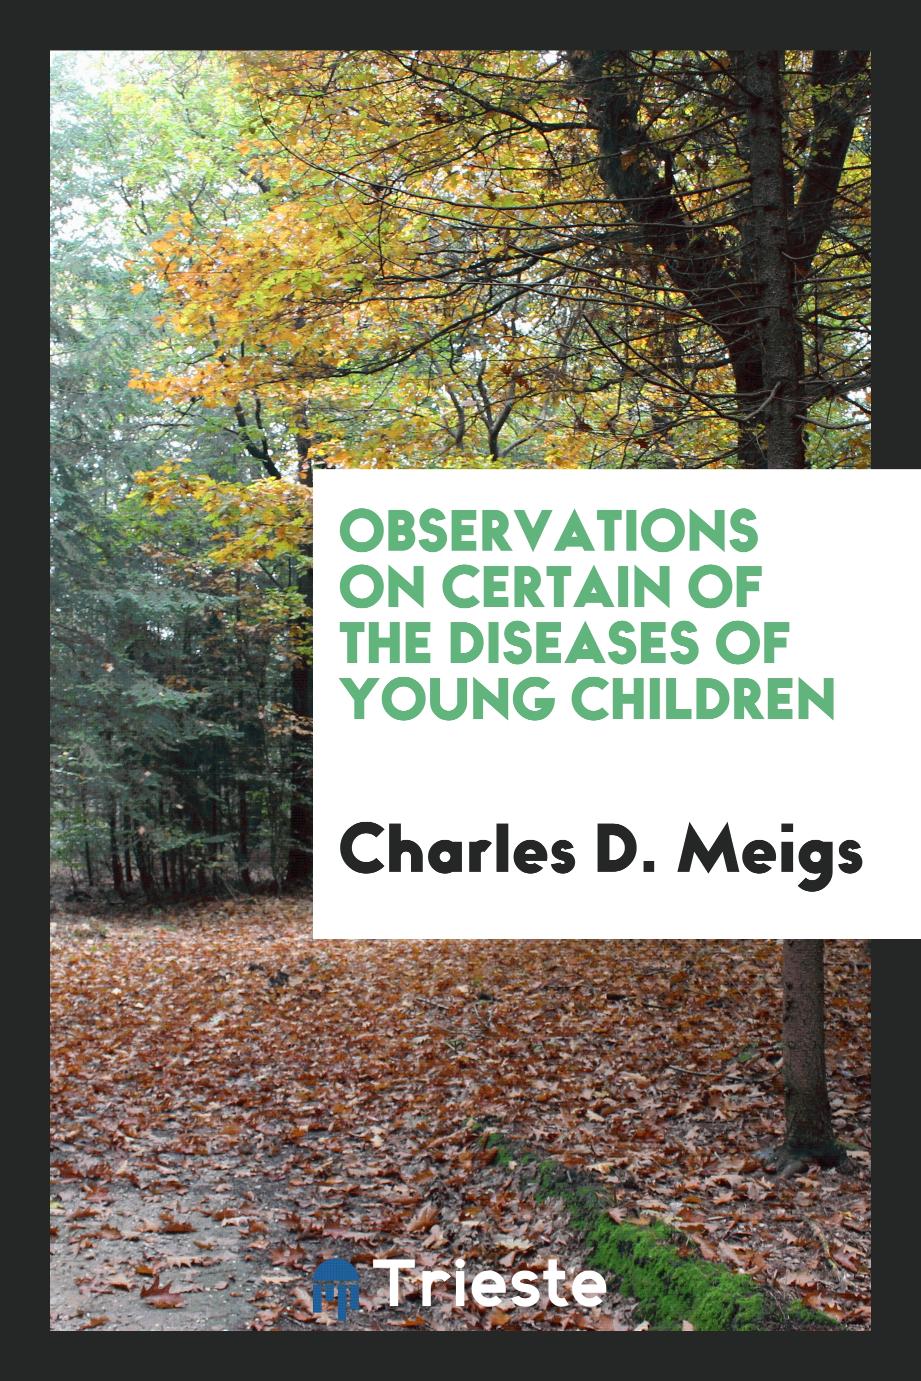 Observations on certain of the diseases of young children